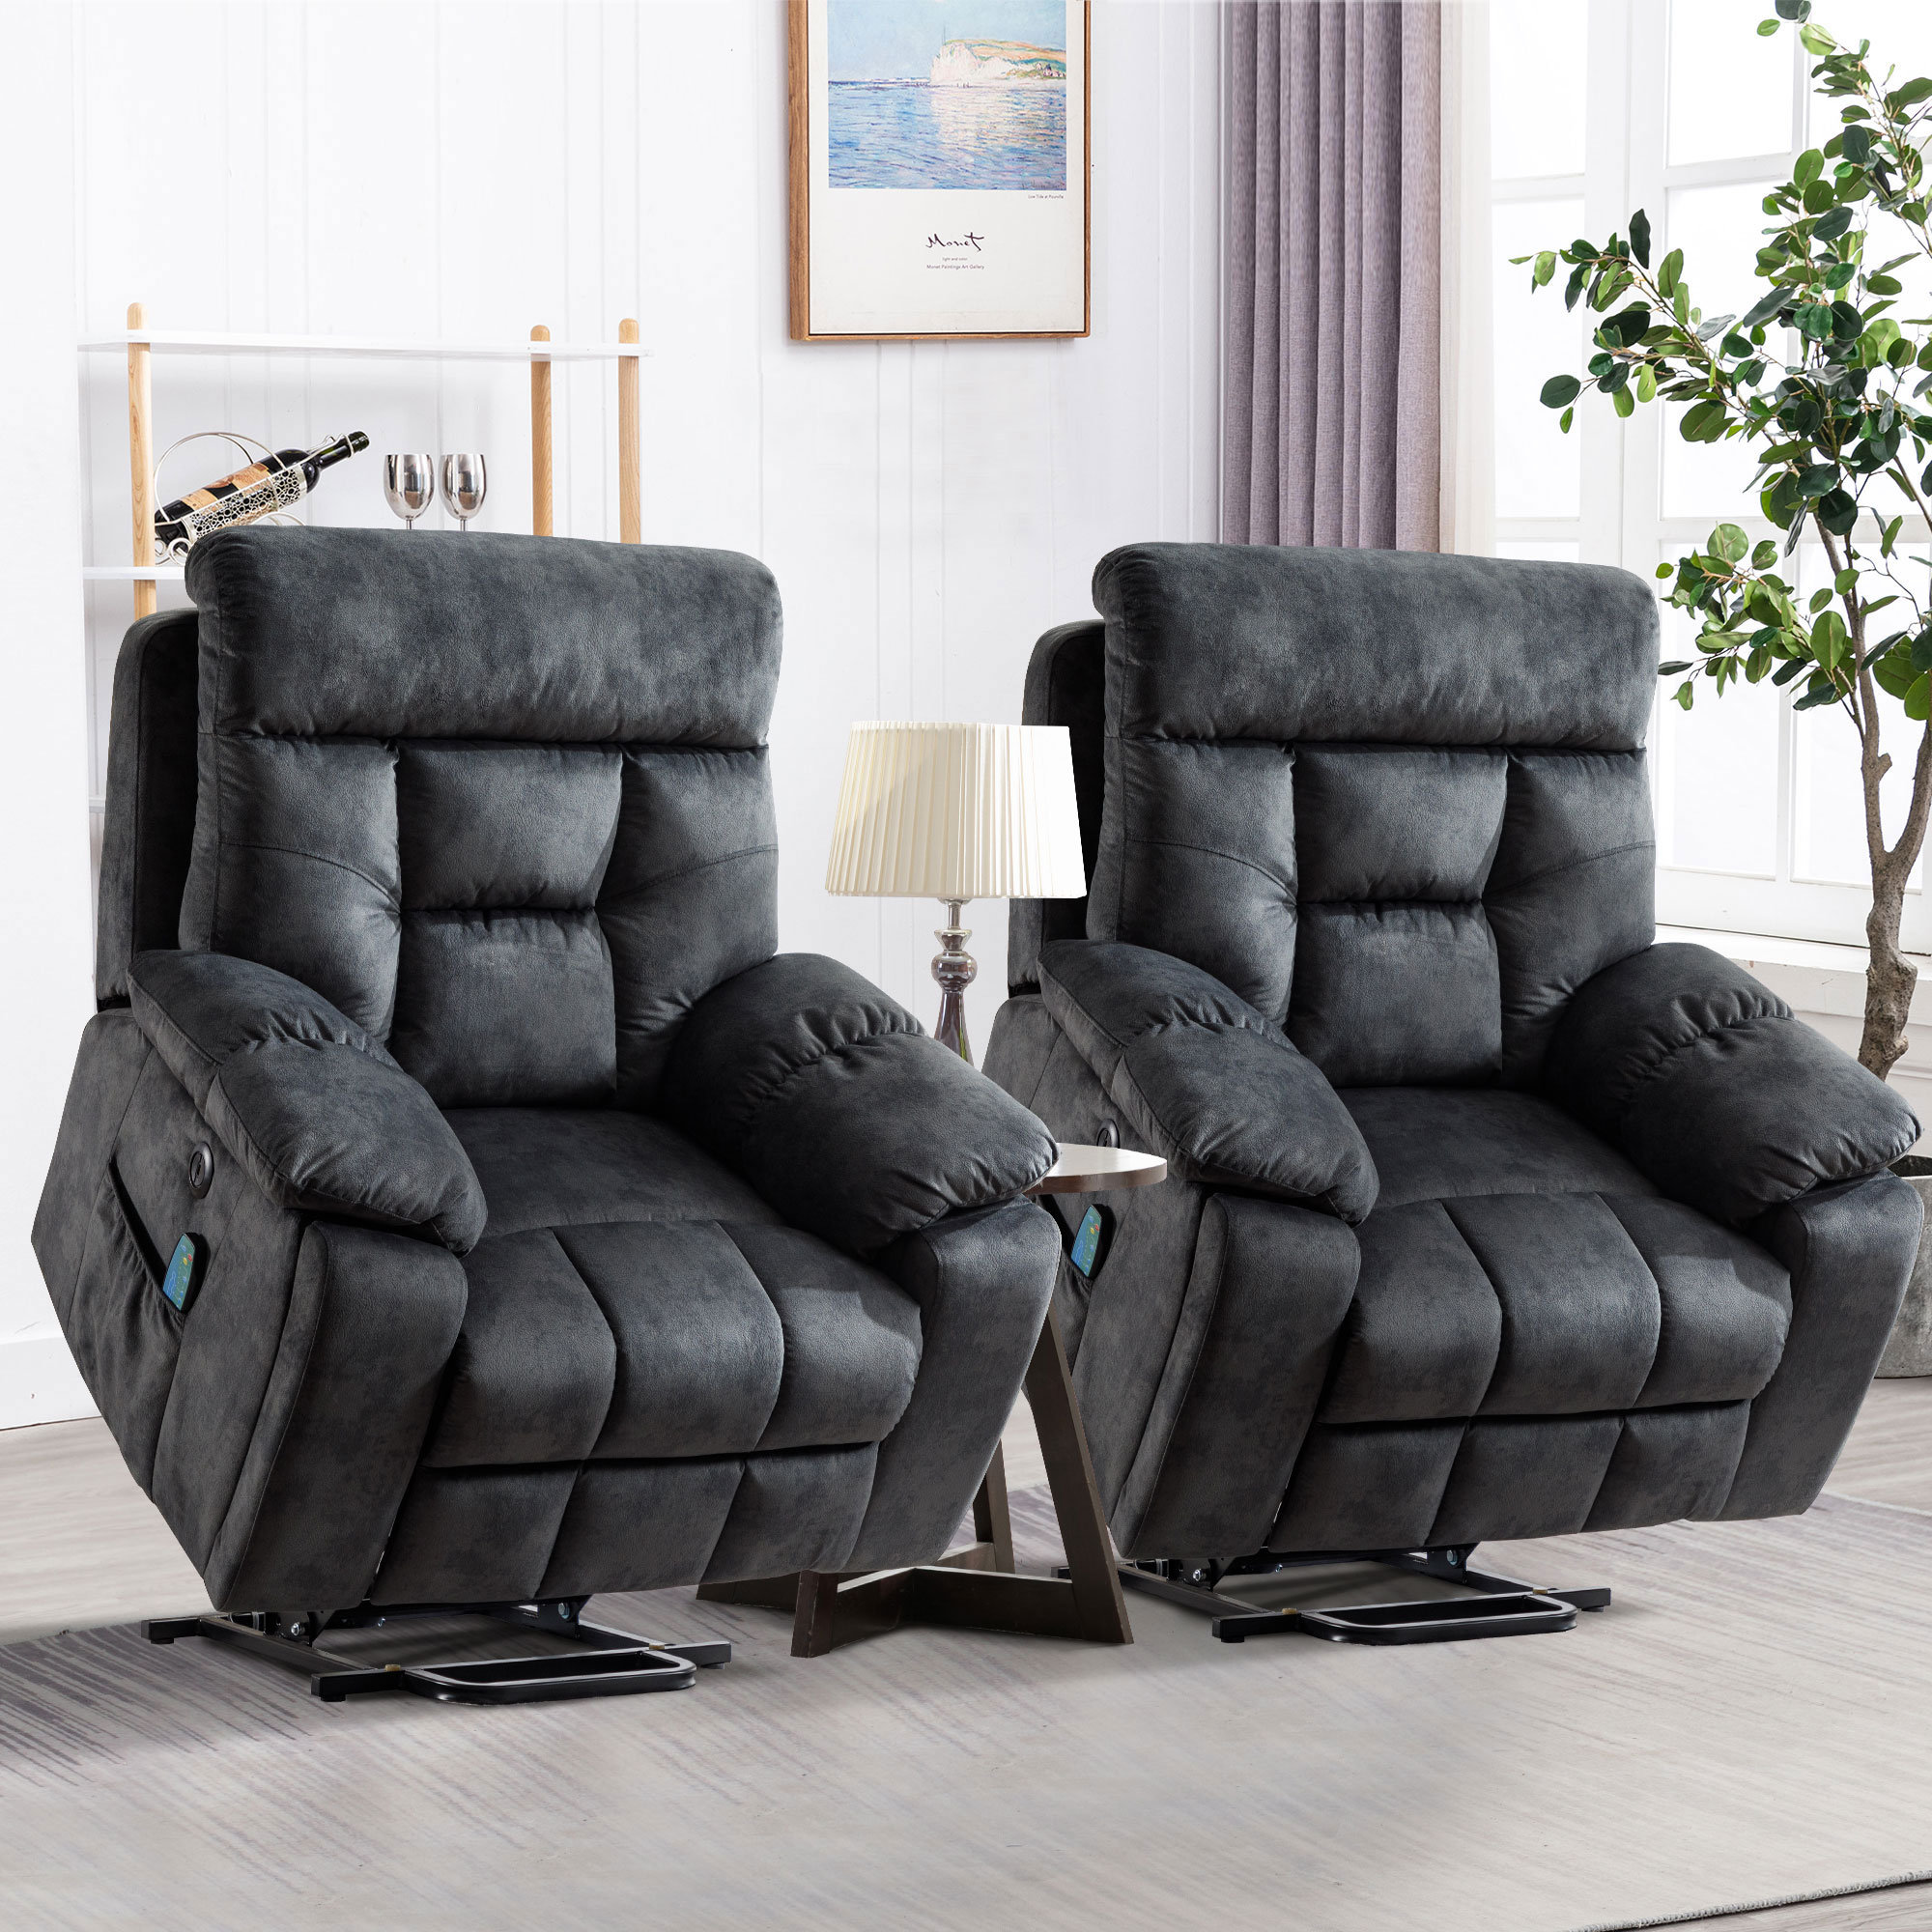 41'' Oversized Power Lift Chair - Heated Massage Electric Recliner with Super Soft Padding (Set of 2) Red Barrel Studio Body Fabric: Gray